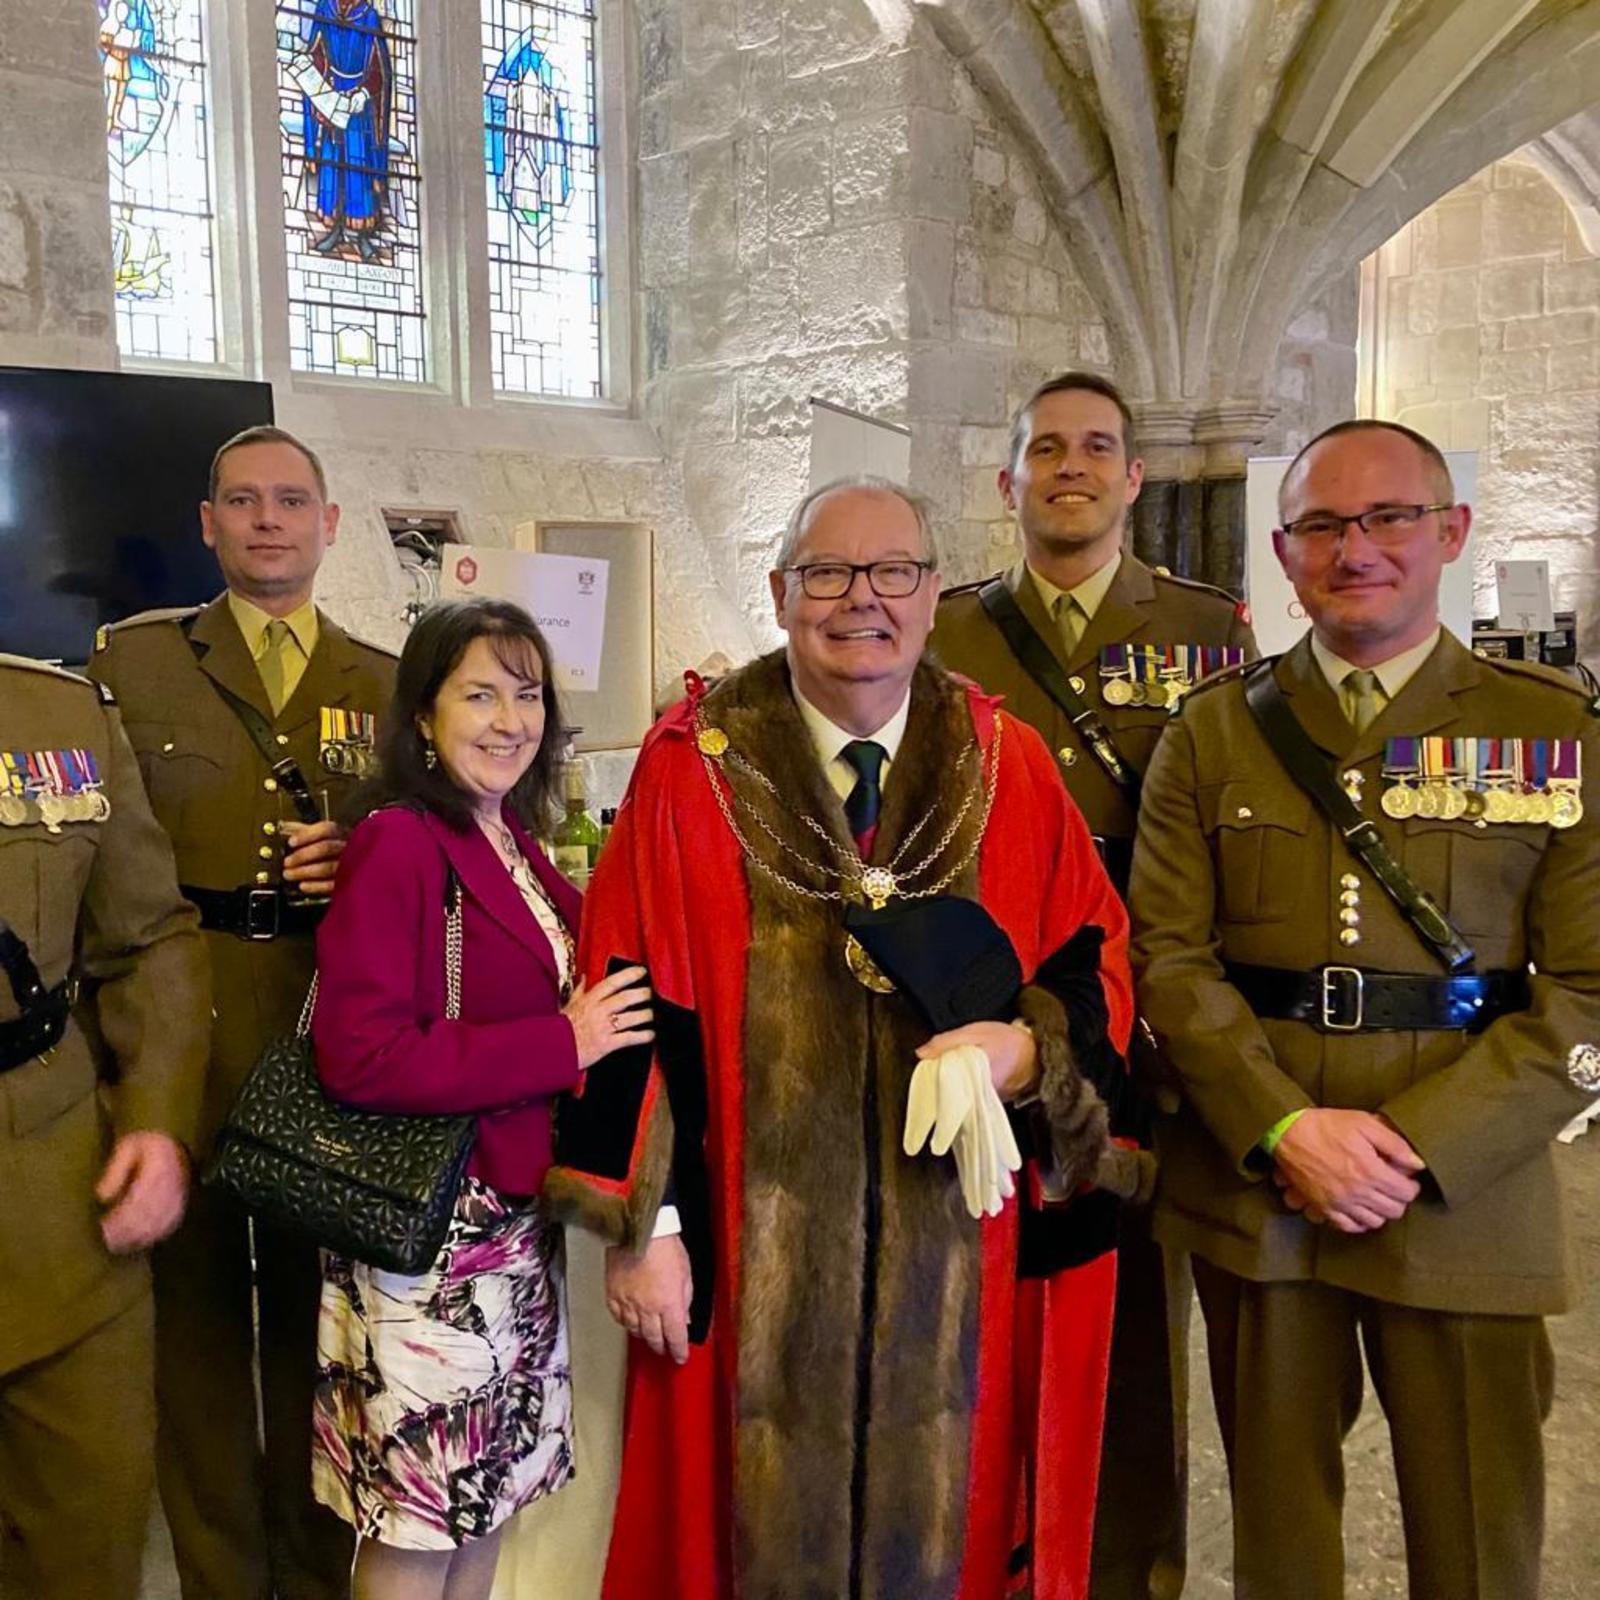 30 Mar 23 - The completely ‘sold out’ 16th Lord Mayor’s Big Curry Lunch, helping to raise funds for the veterans of His Majesty’s Forces, was held at Guildhall in the presence of their Royal Highnesses The Duke and Duchess of Gloucester. 